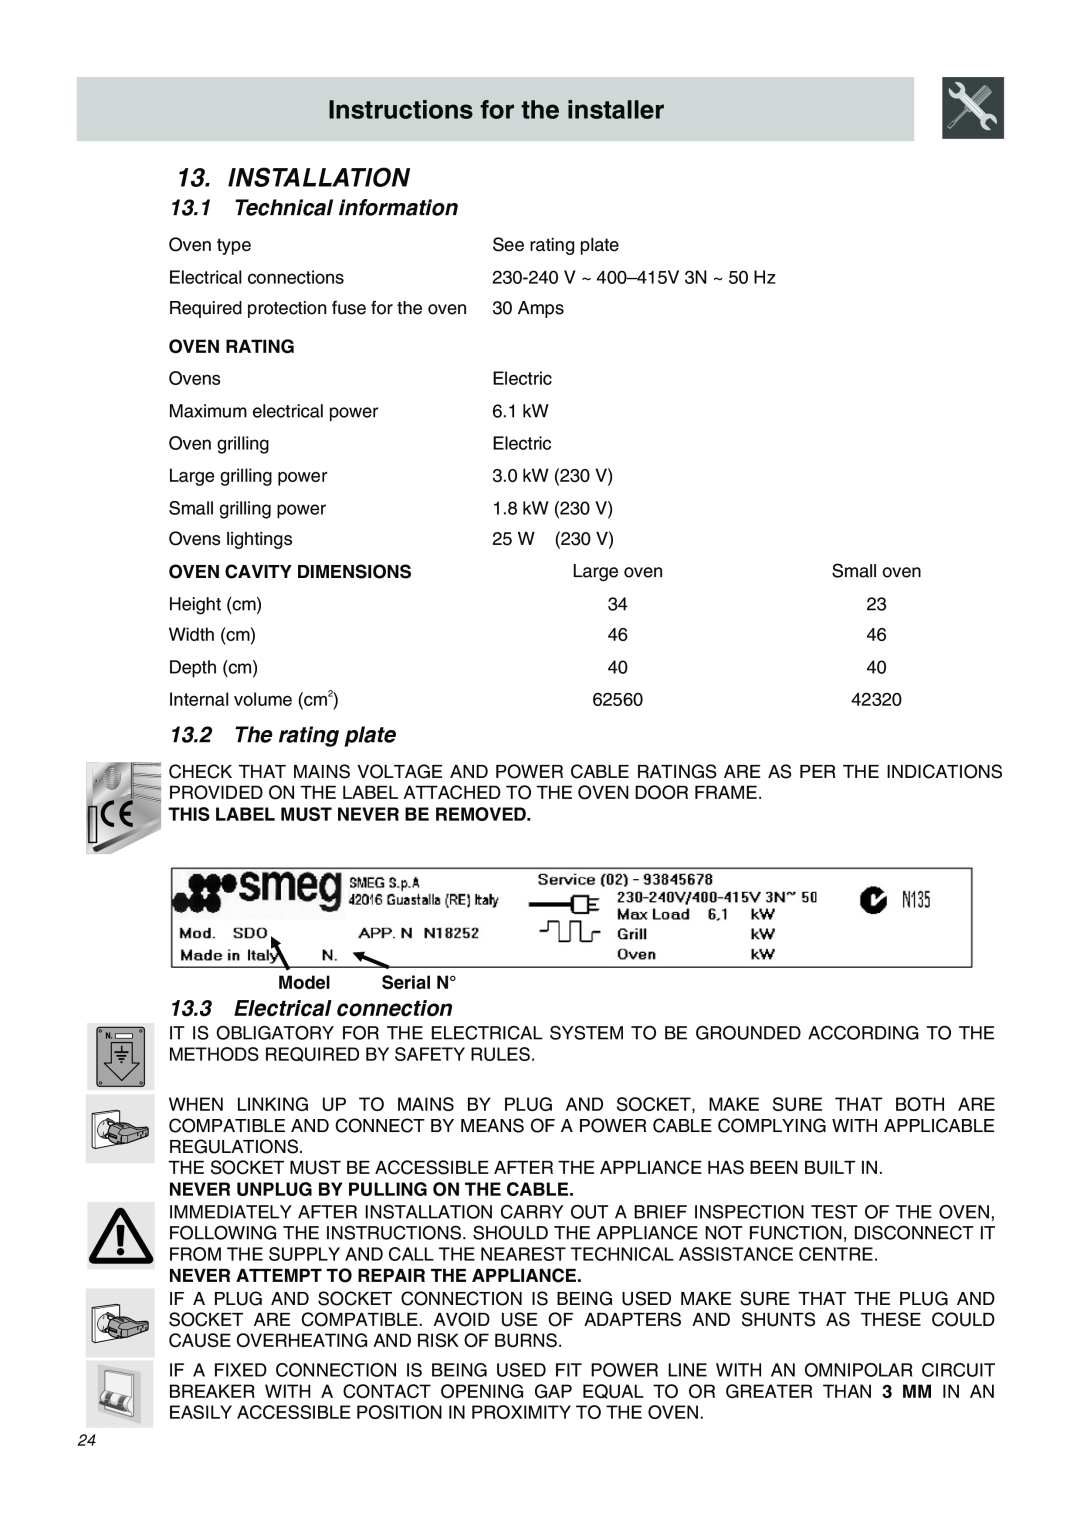 Smeg SDO10 Instructions for the installer, Installation, 13.1, Technical information, 13.2, The rating plate, Oven Rating 